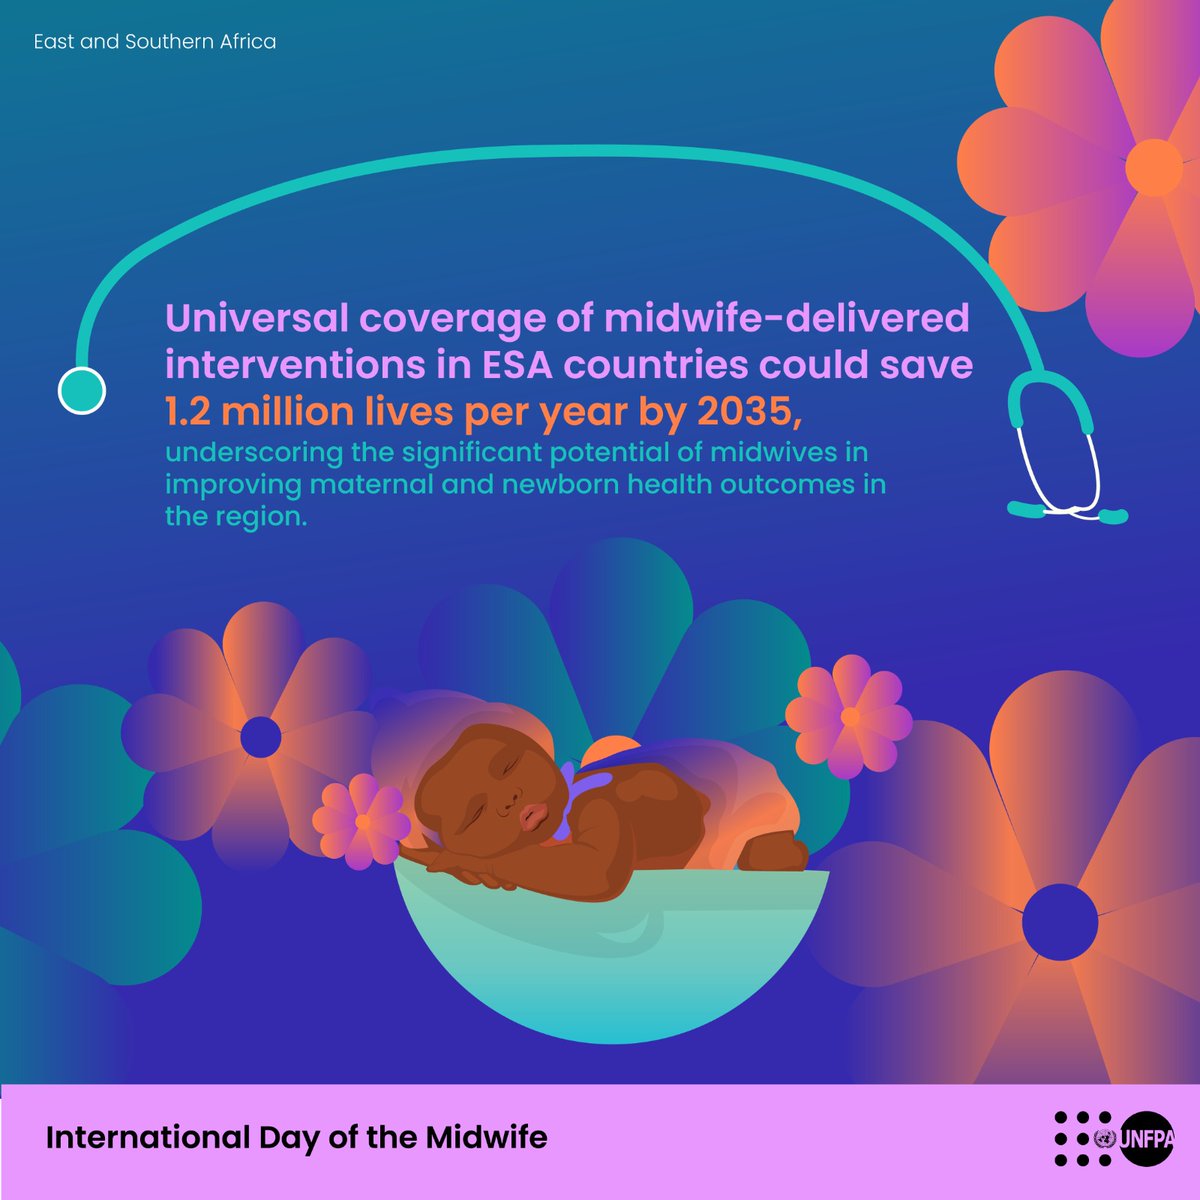 No country will be able to achieve universal health coverage without comprehensive access to SRHR services #Midwives can provide 90% of essential SRHR services,thus contributing to achieving universal health coverage #MadagascarMatters #IDM2024 #MauritiusMatters #SeychellesMatter